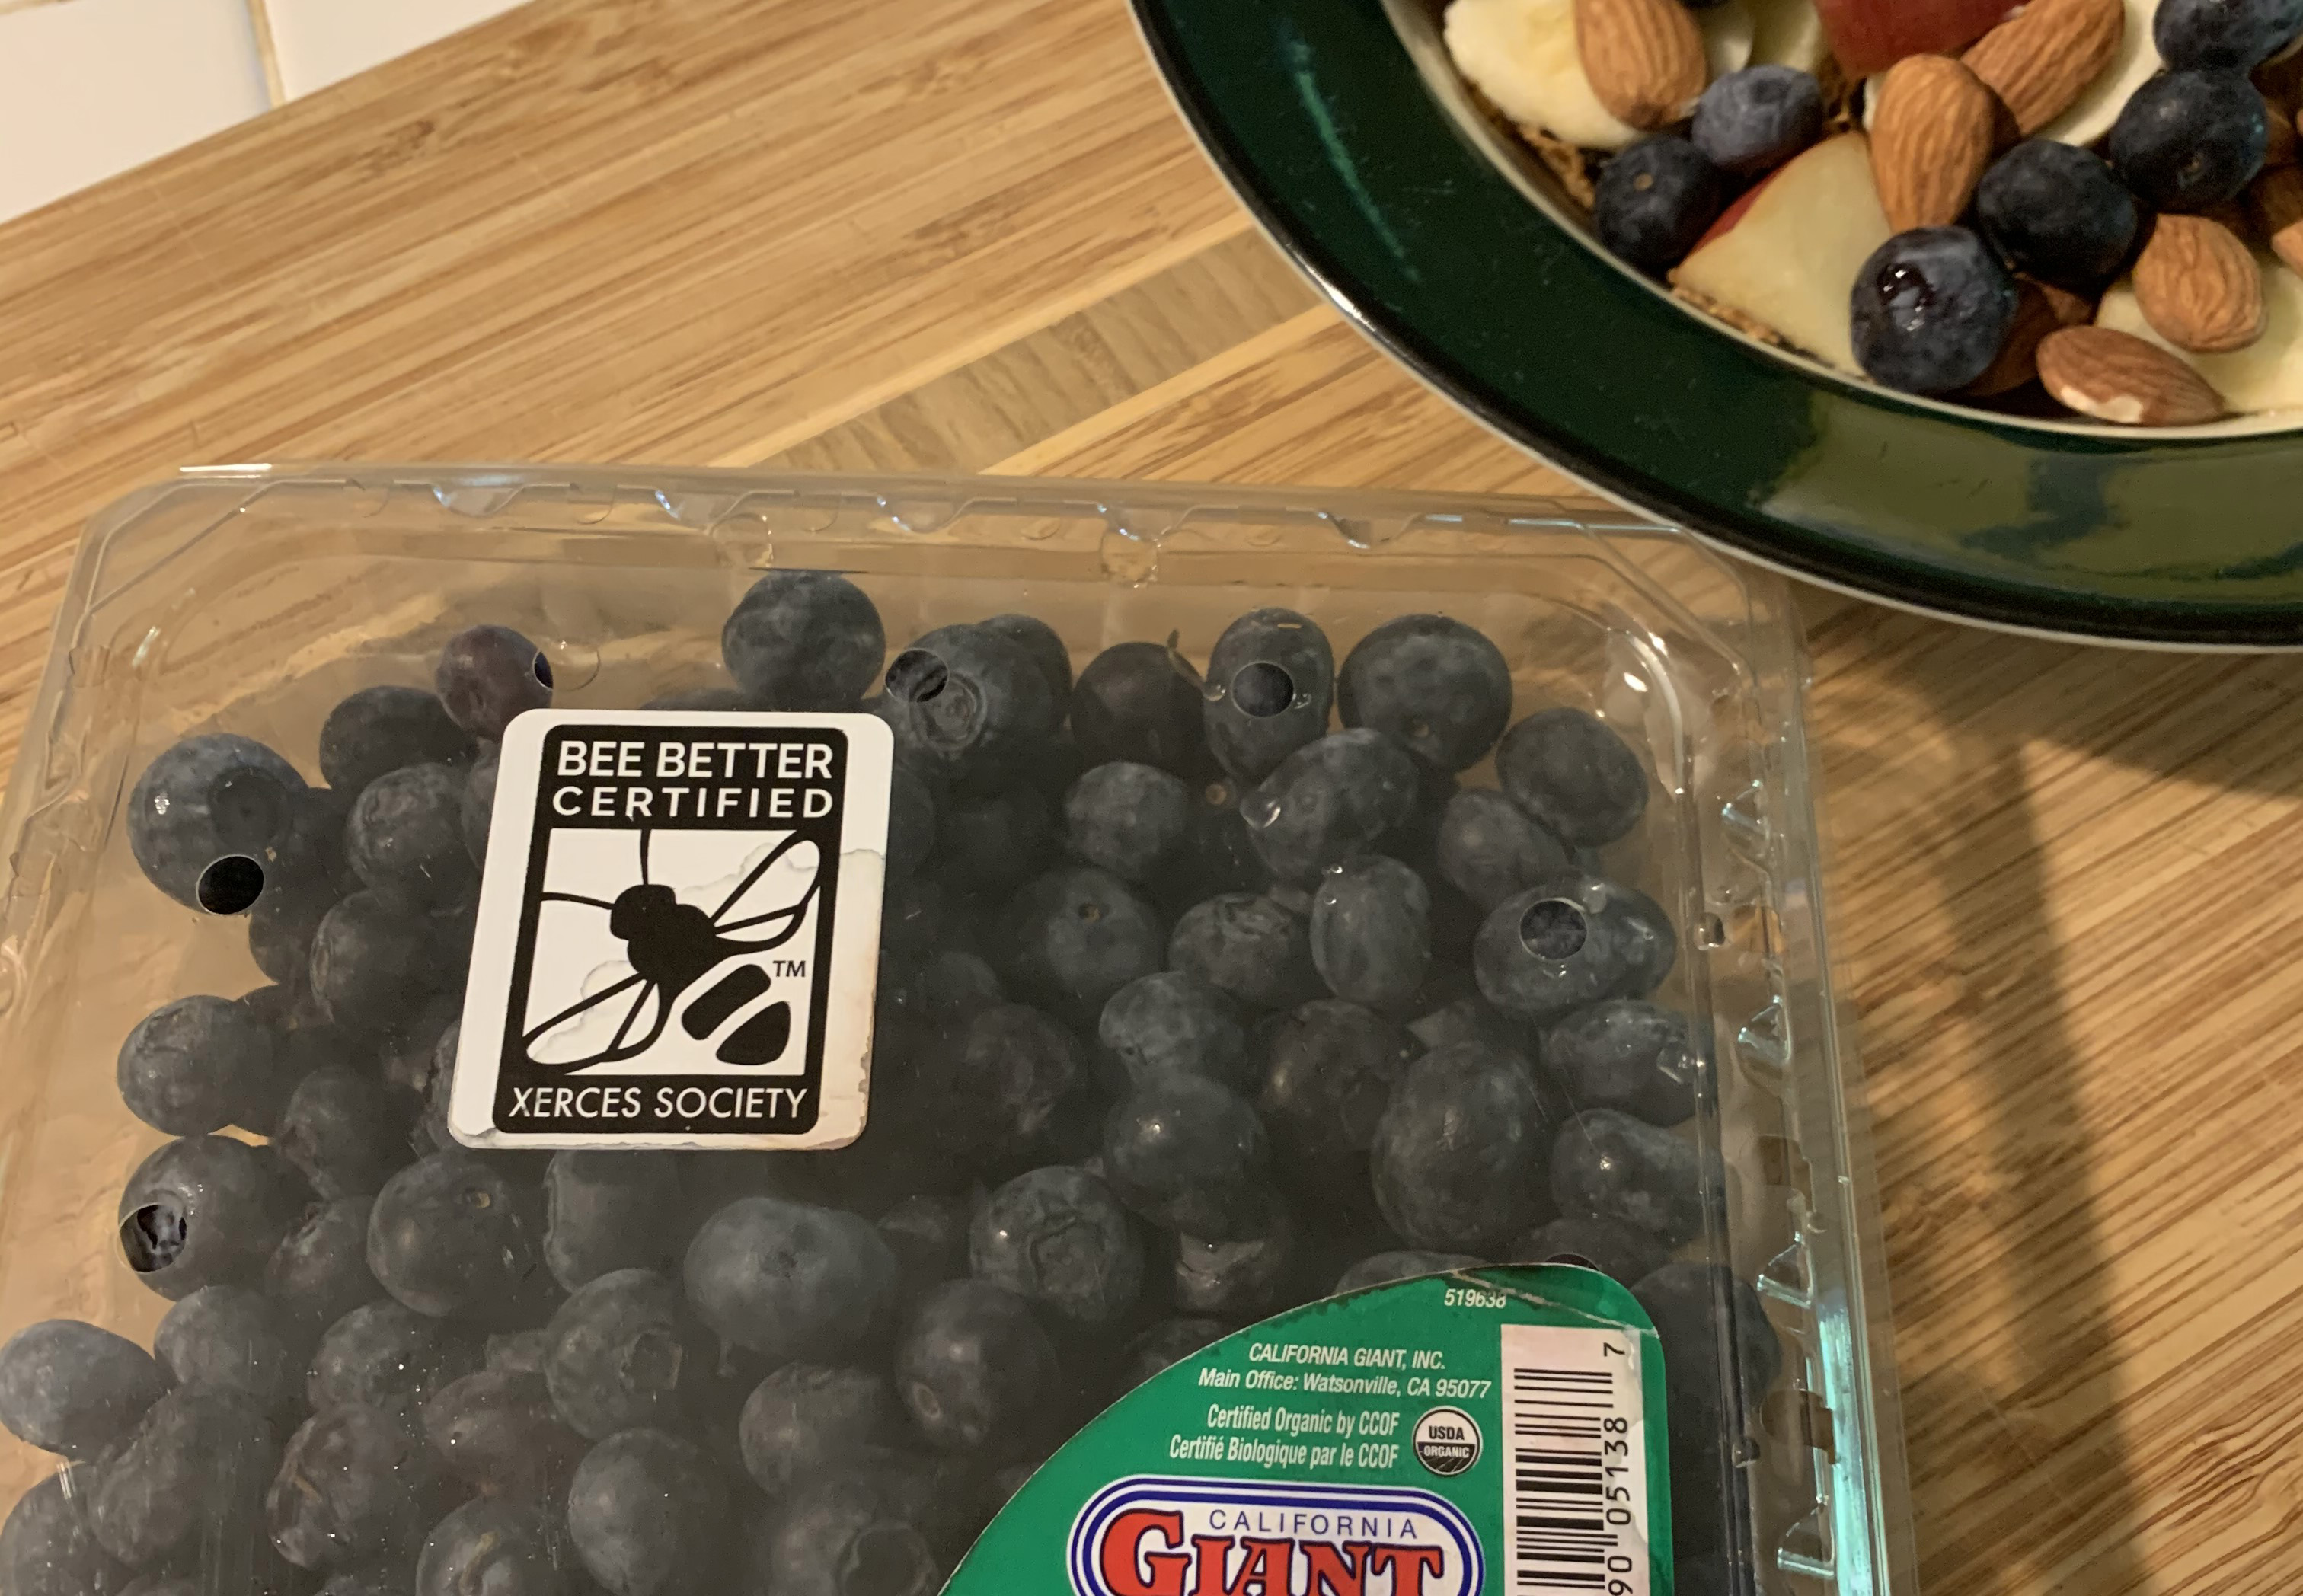 A clear plastic container full of round, dark colored blueberries. The container has a green label with white writing in the lower right corner and in the top right corner, a black-and-white label that says the blueberries are Bee Better Certified. Beside the container is a green cereal bowl containing blueberries, almonds, and sliced apples.